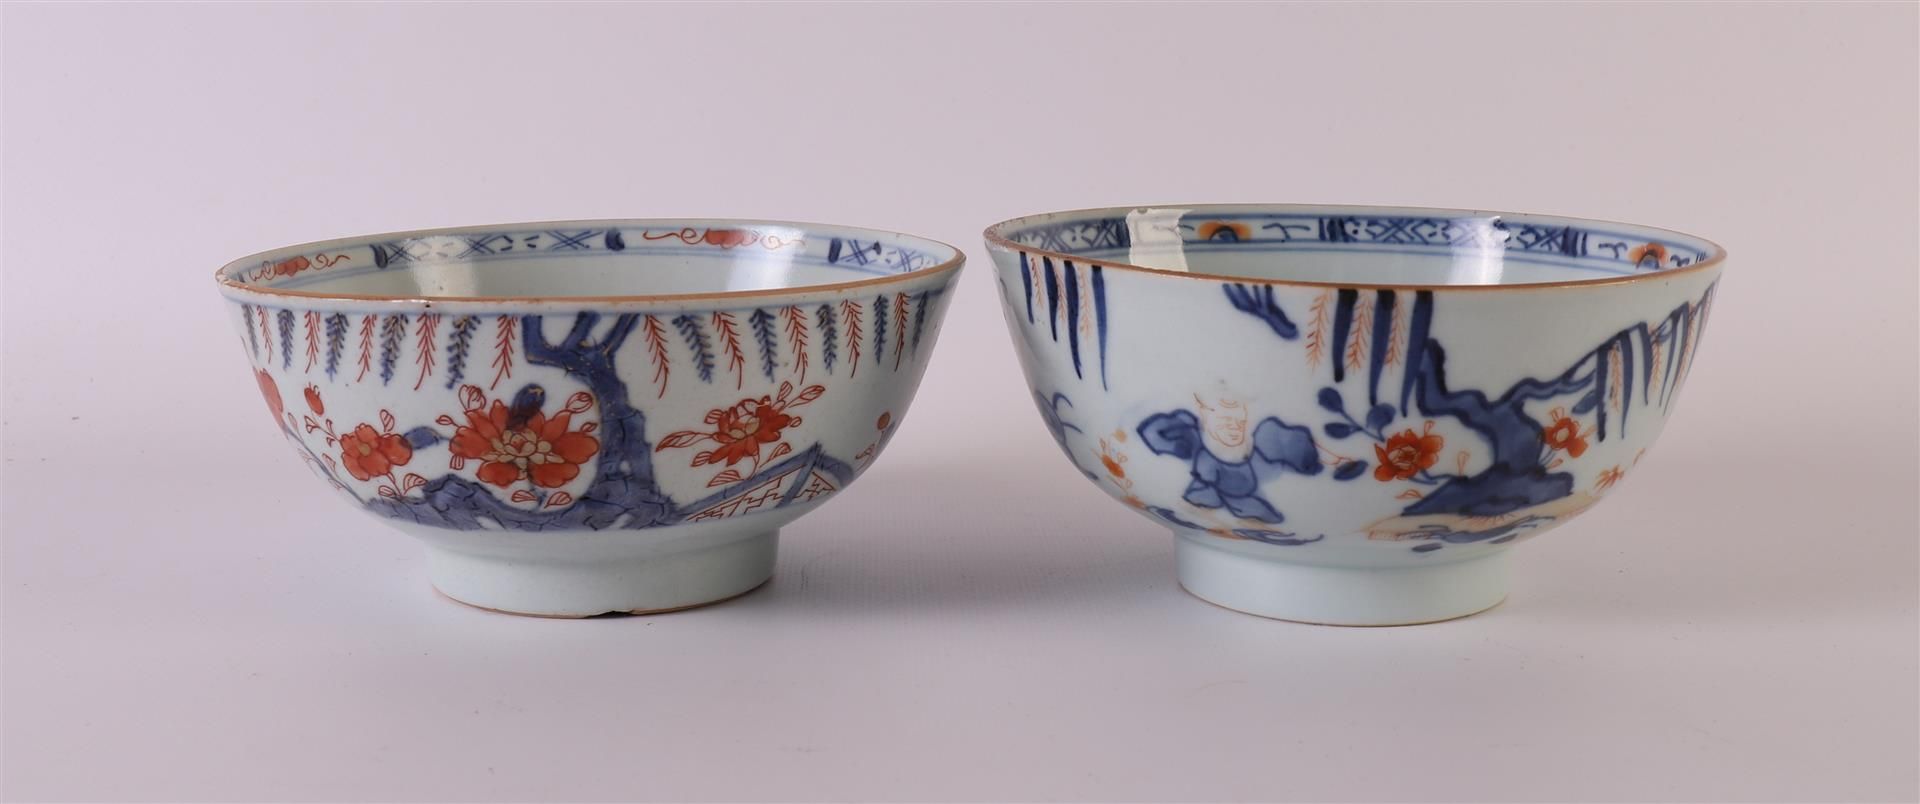 A set of porcelain Chinese Imari bowls on a stand, China, Qianlong, 18th century